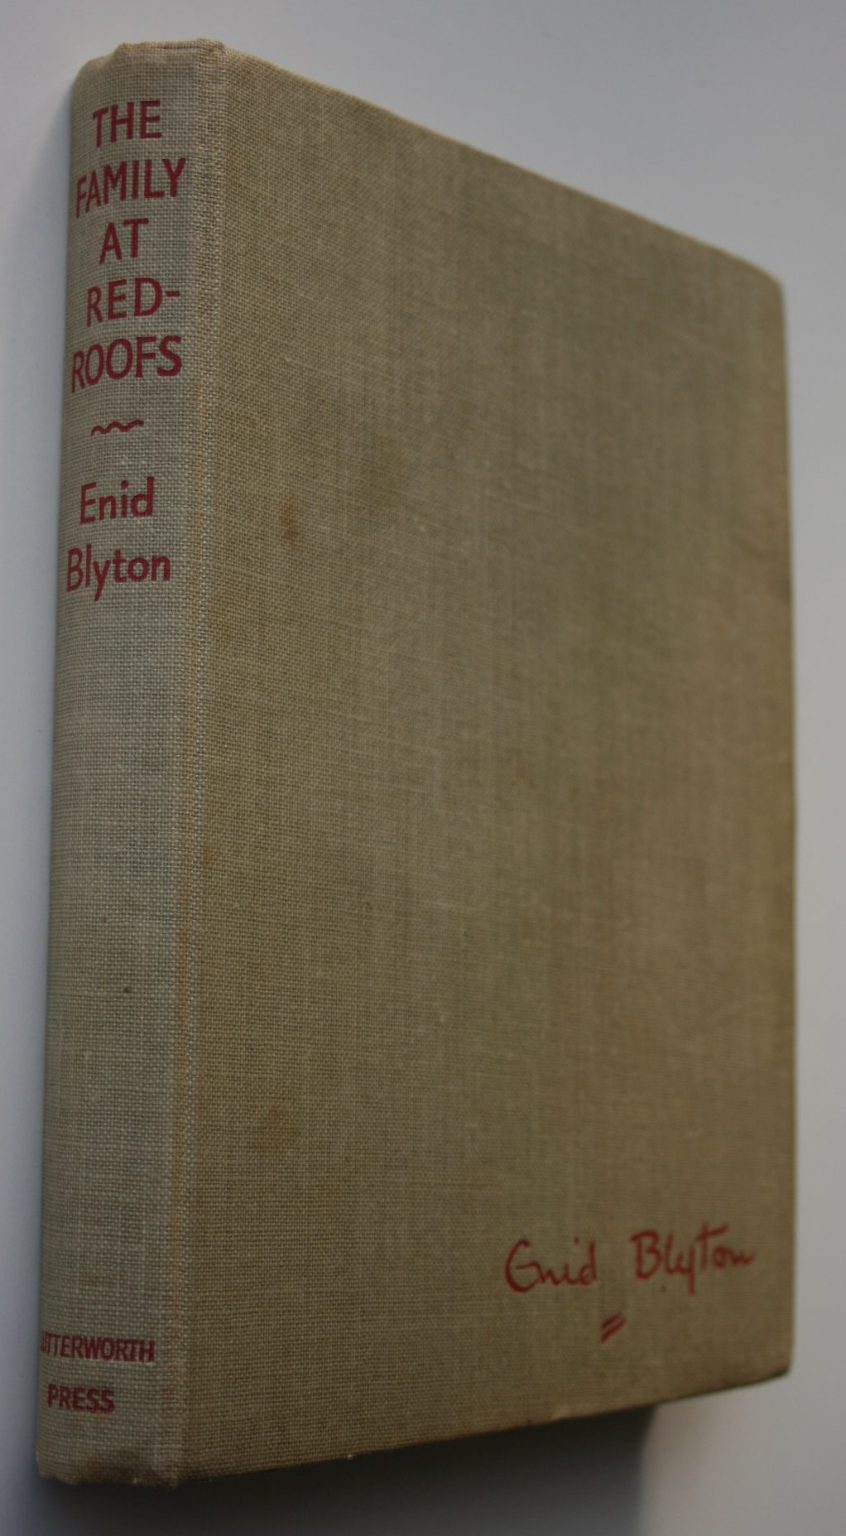 The Family At Red-Roofs. by Enid Blyton. 1945 First Edition with jacket